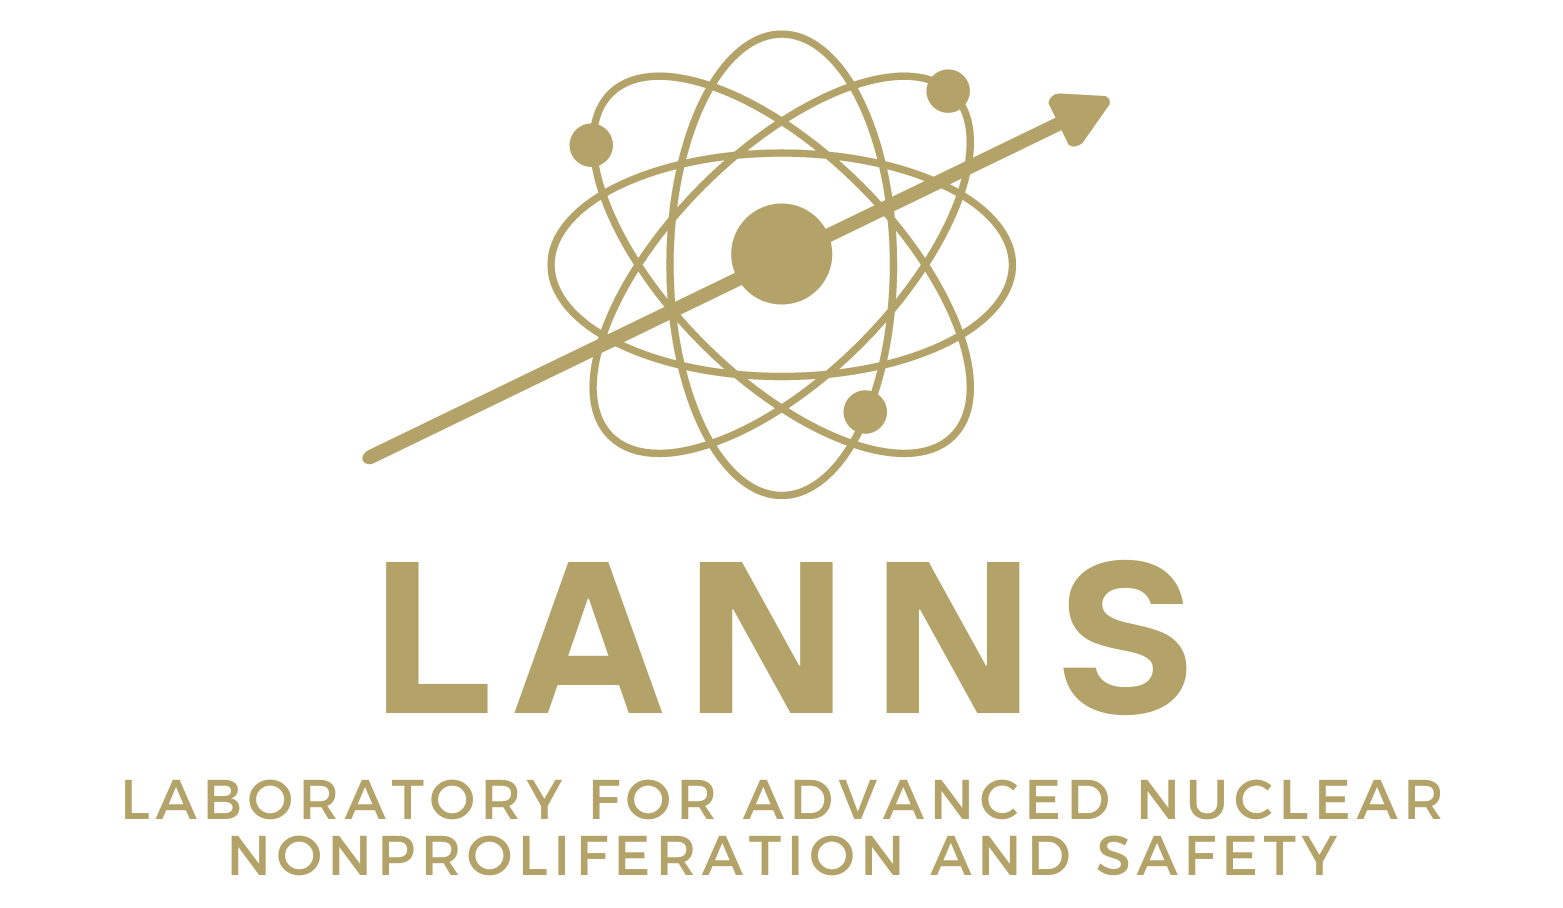 Laboratory for Advanced Nuclear Nonproliferation and Safety